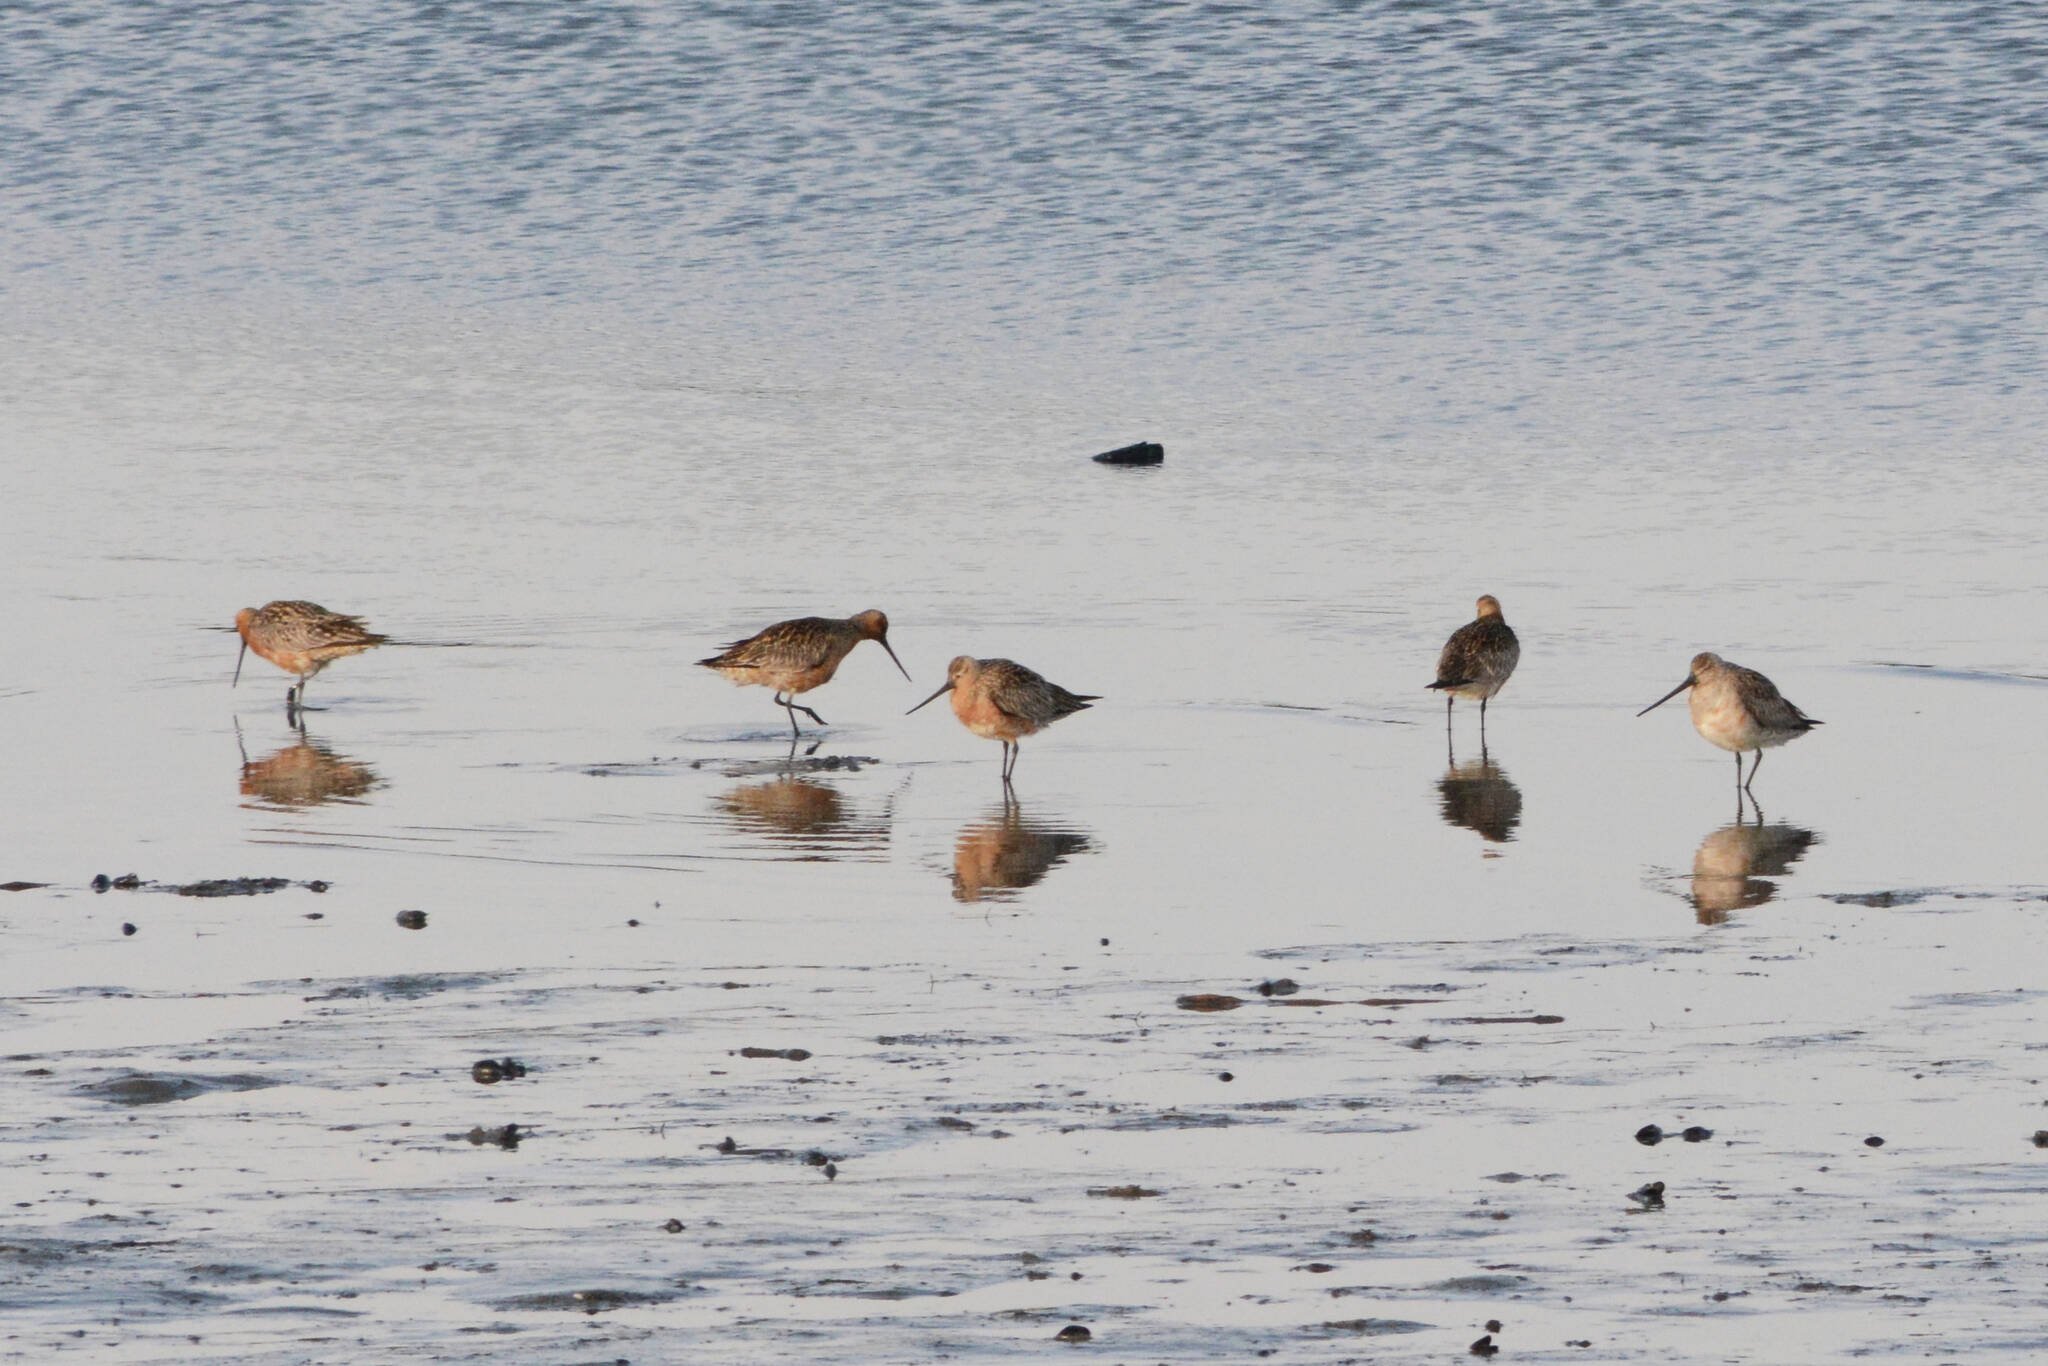 Bar-tailed godwits feed on Saturday, May 1, 2021, at Mud Bay near the Homer Spit in Homer, Alaska. The birds were one of several species of shorebirds seen in Mud Bay over the weekend that included western sandpipers, dunlins, long-billed dowitchers and Pacific plovers. (Photo by Michael Armstrong/Homer News)